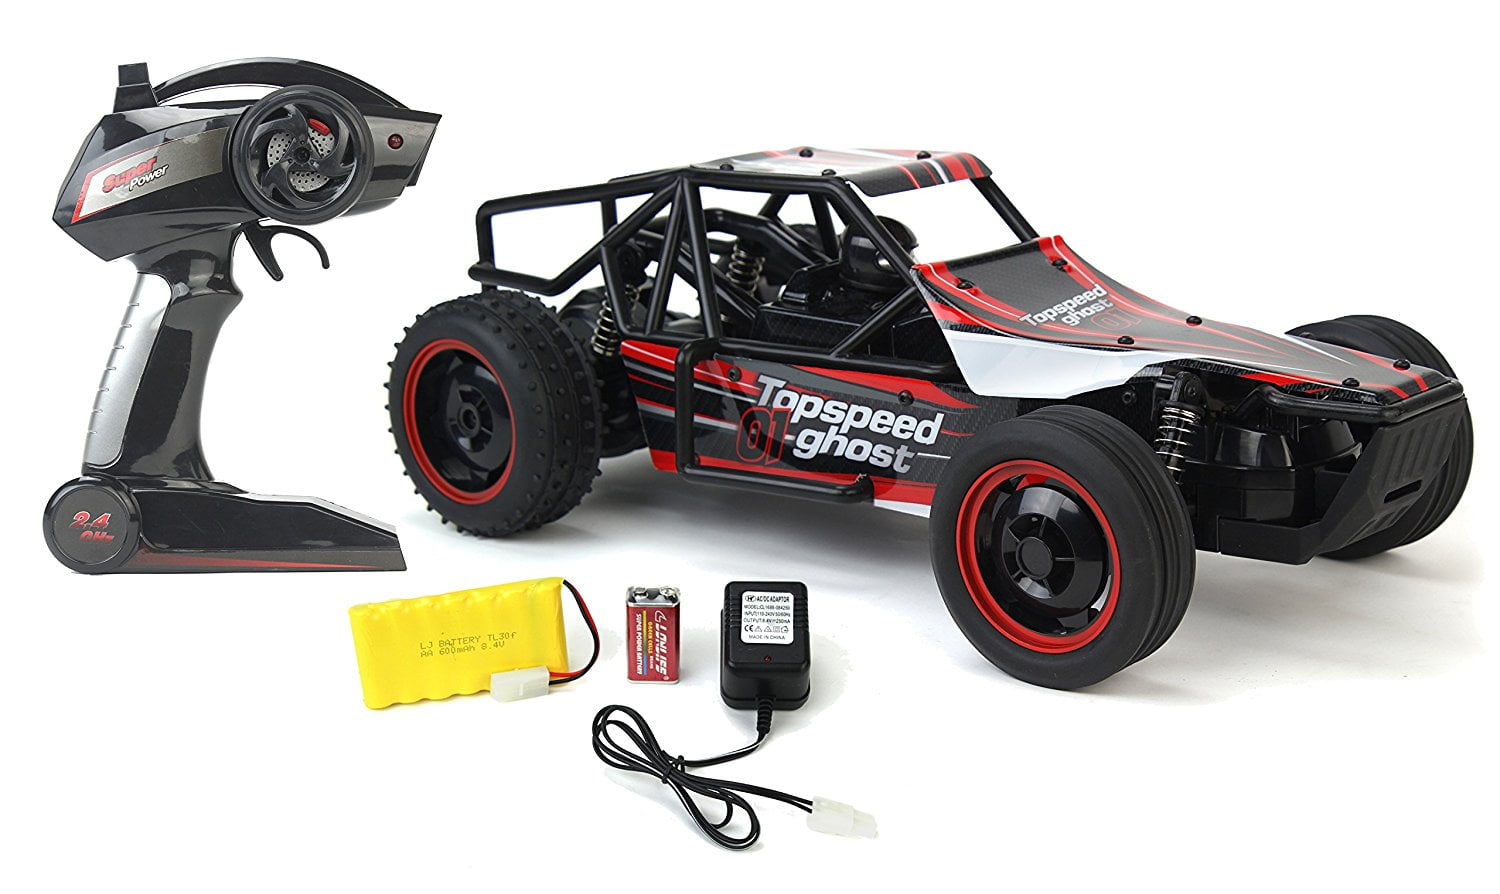 Gallop Ghost Top Speed Remote Control 2.4 GHz RC Red Toy Buggy Car 1:10 Scale Size Ready To Run w/ Working Suspension, Spring Shock Absorbers Walmart.com